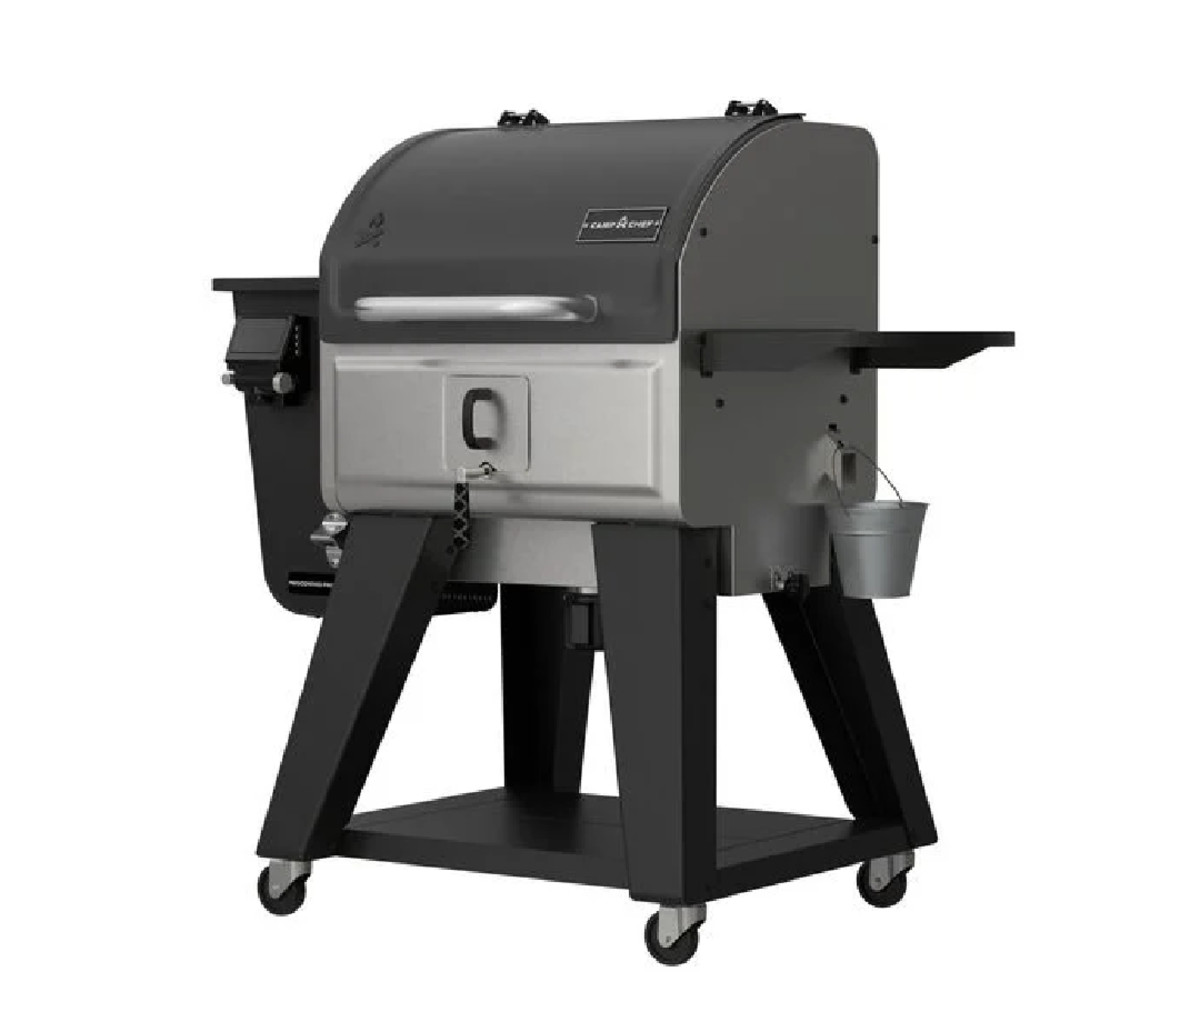 5 Great Grills, Smokers and Pizza Ovens For Backyard Cooking - Men's Journal